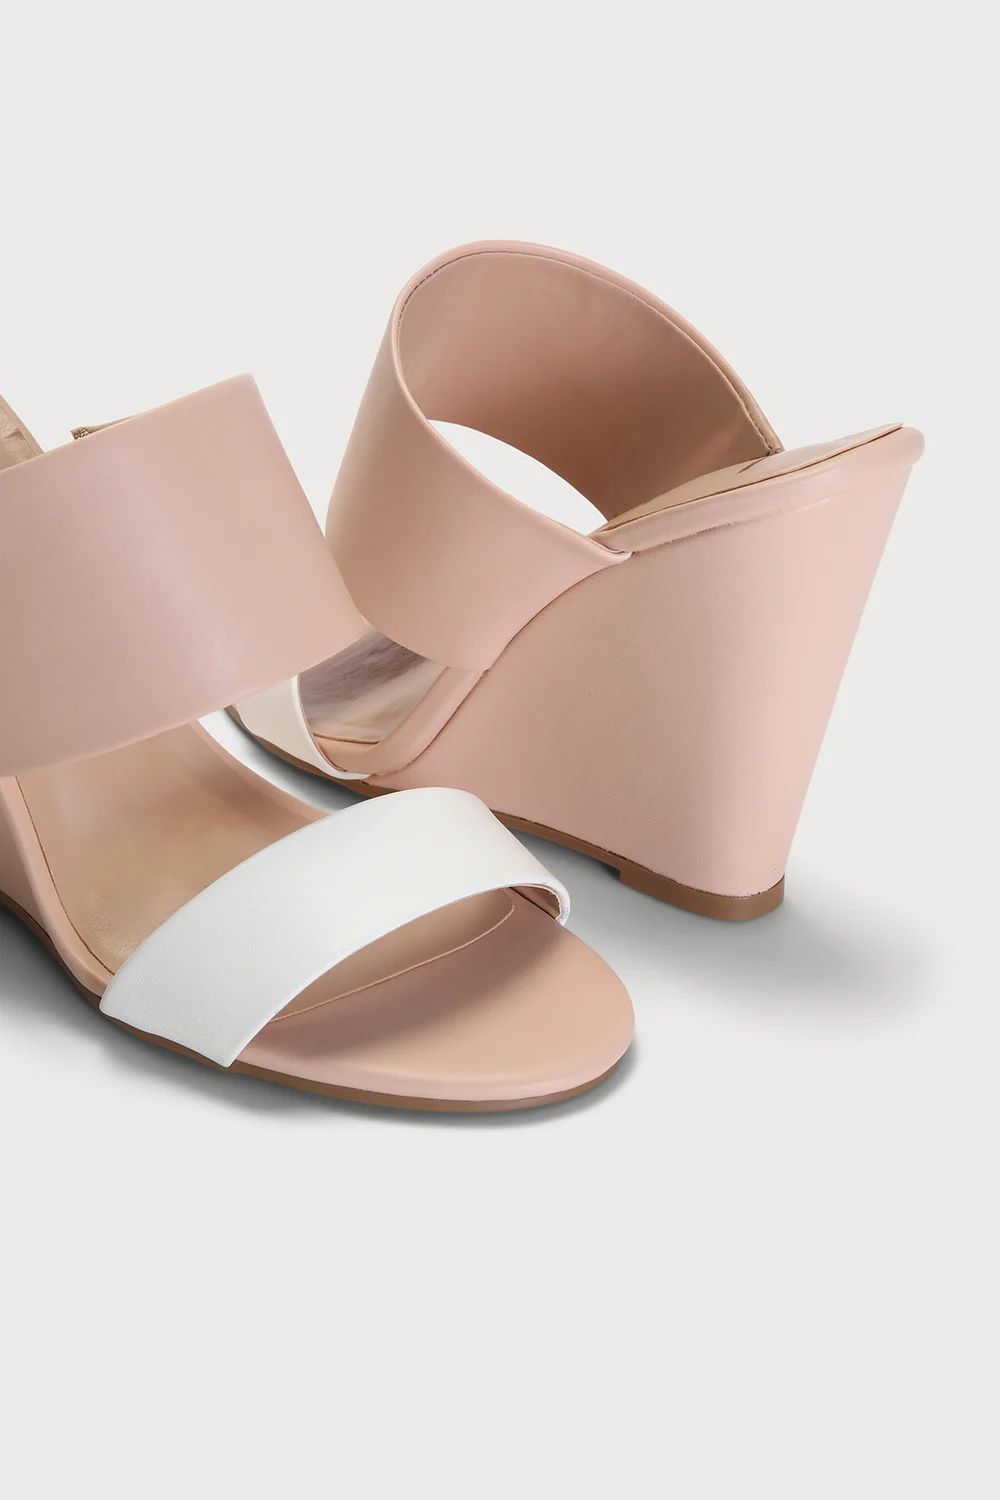 Biava Light Nude and White Wedge Sandals | Lulus (US)